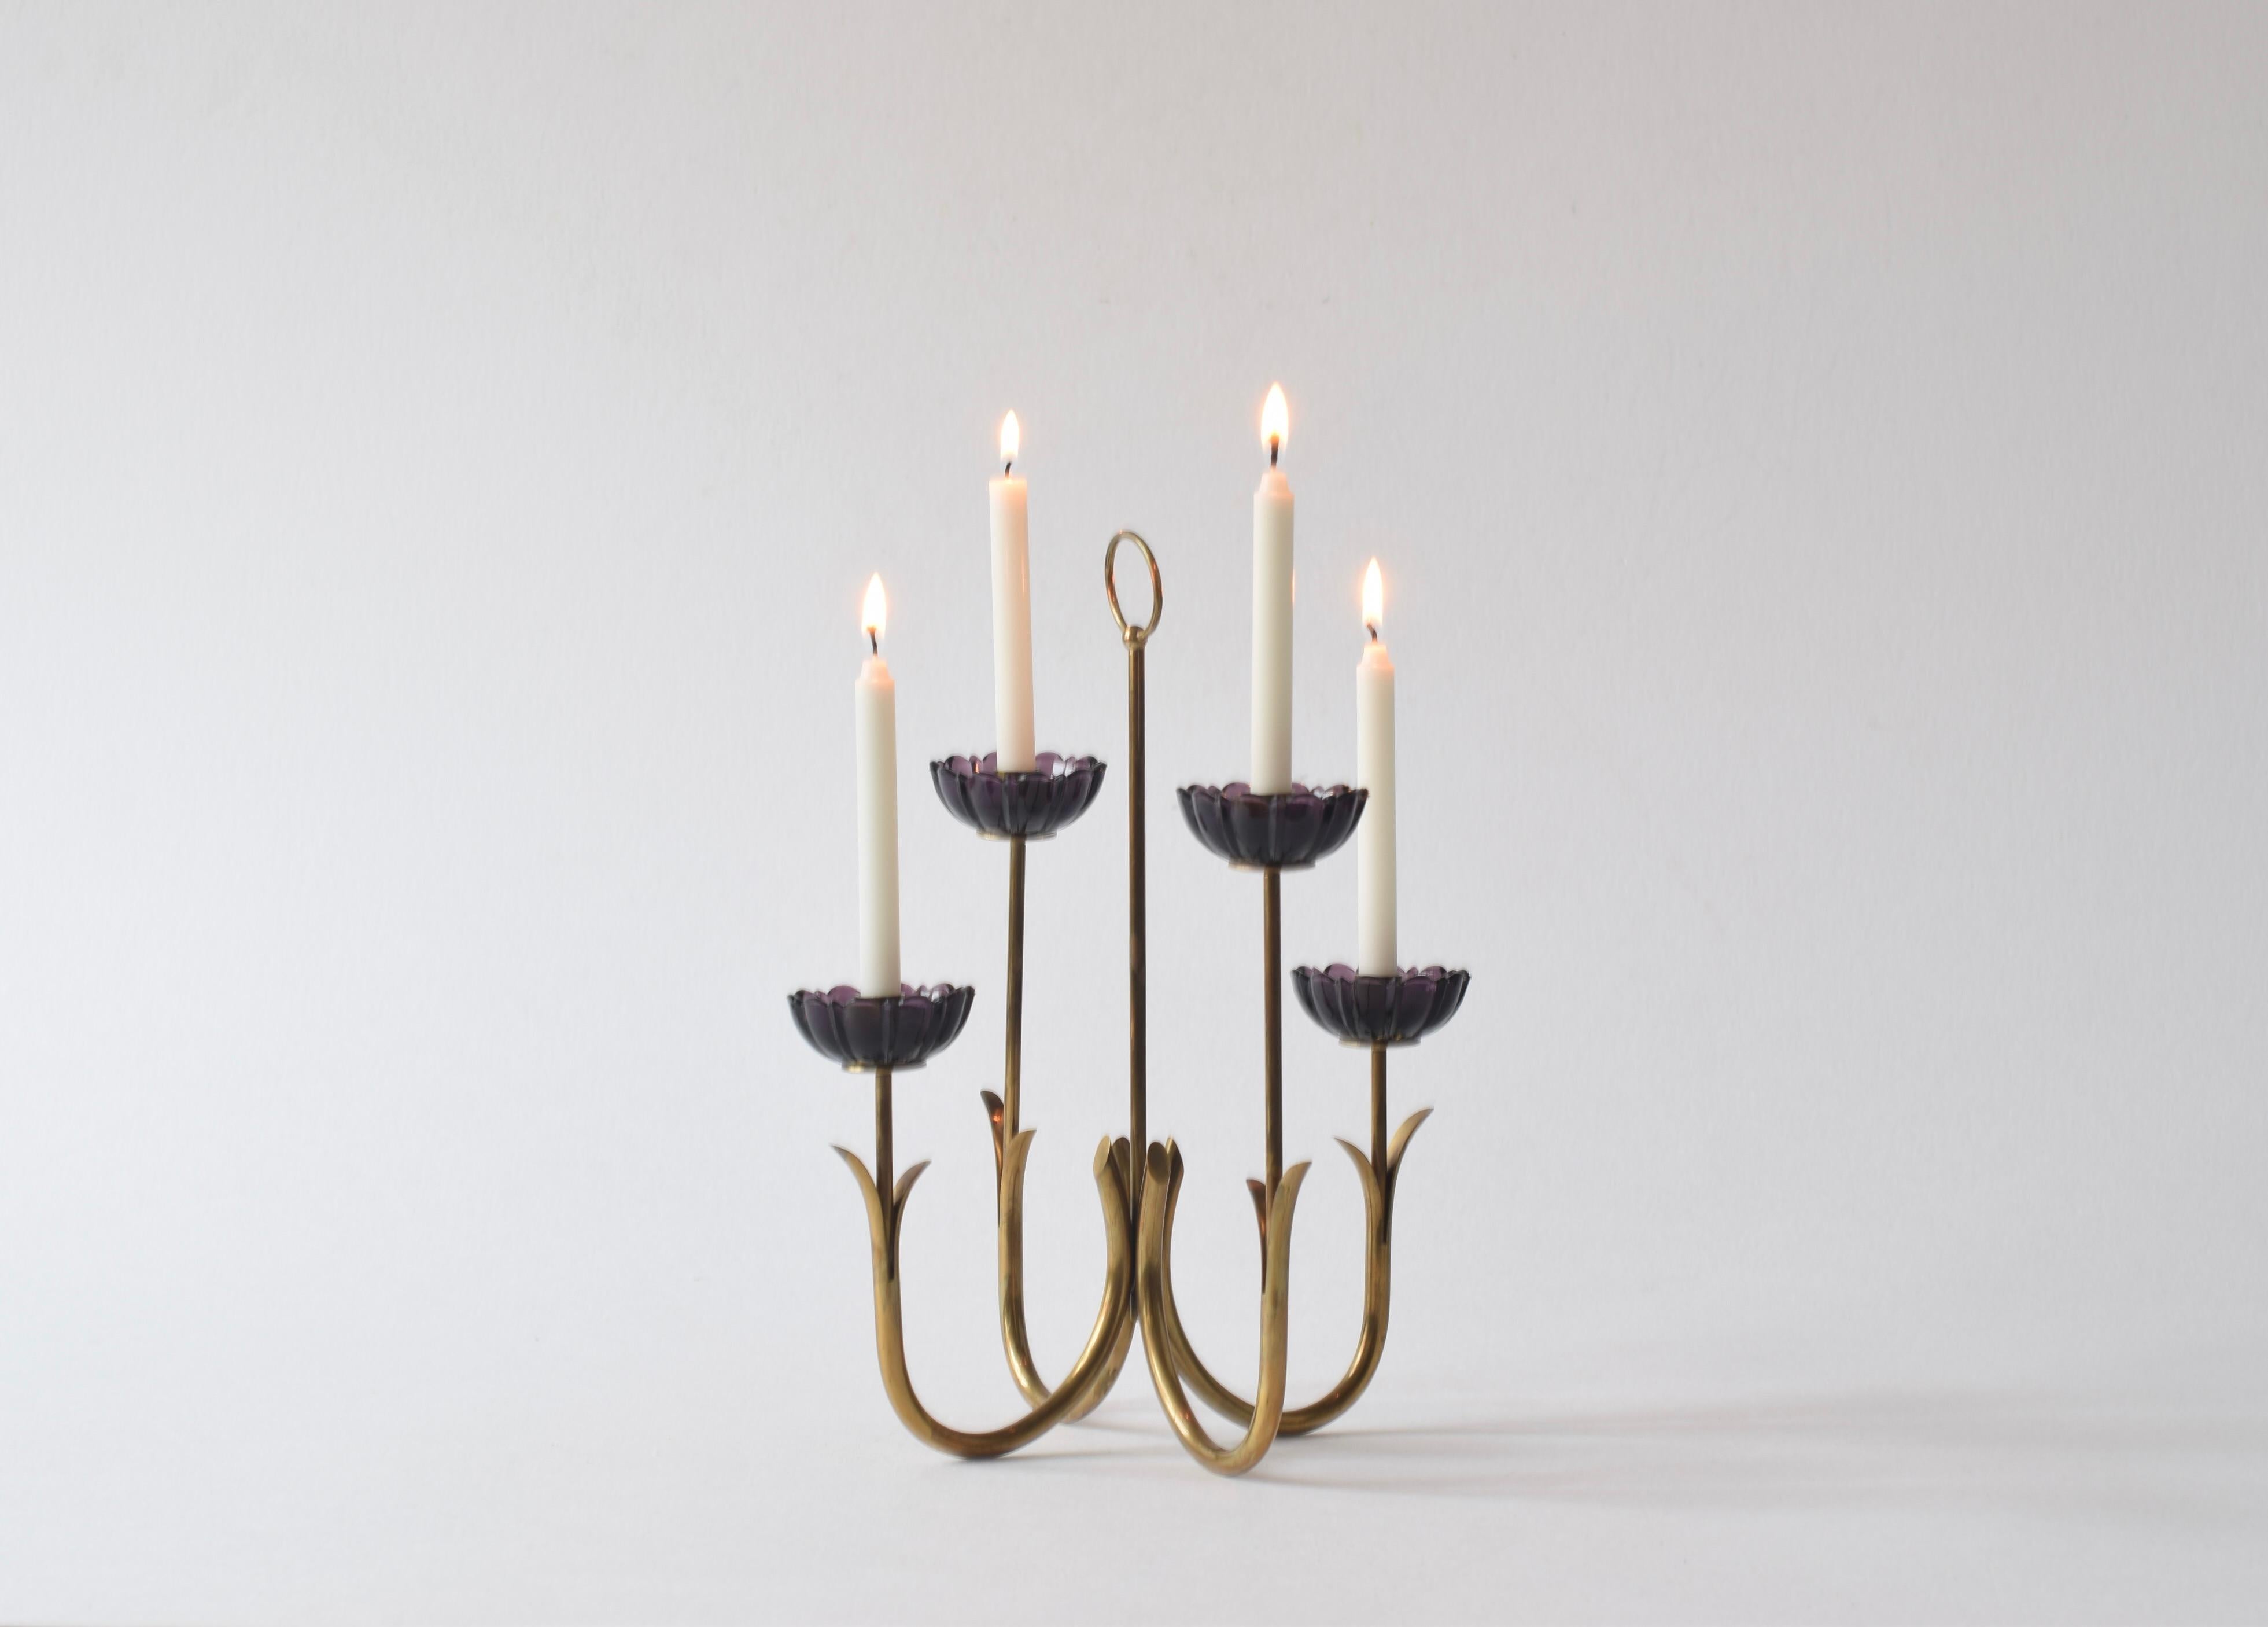 Four arm candelabra by Swedish designer Gunnar Ander (1908-1976) for Ystad Metall, Sweden. Made ca 1960s.

The candelabra is made from brass and shaped as four stylized flowers with blossoms of purple glass. 

It holds slim sized tapers.

The